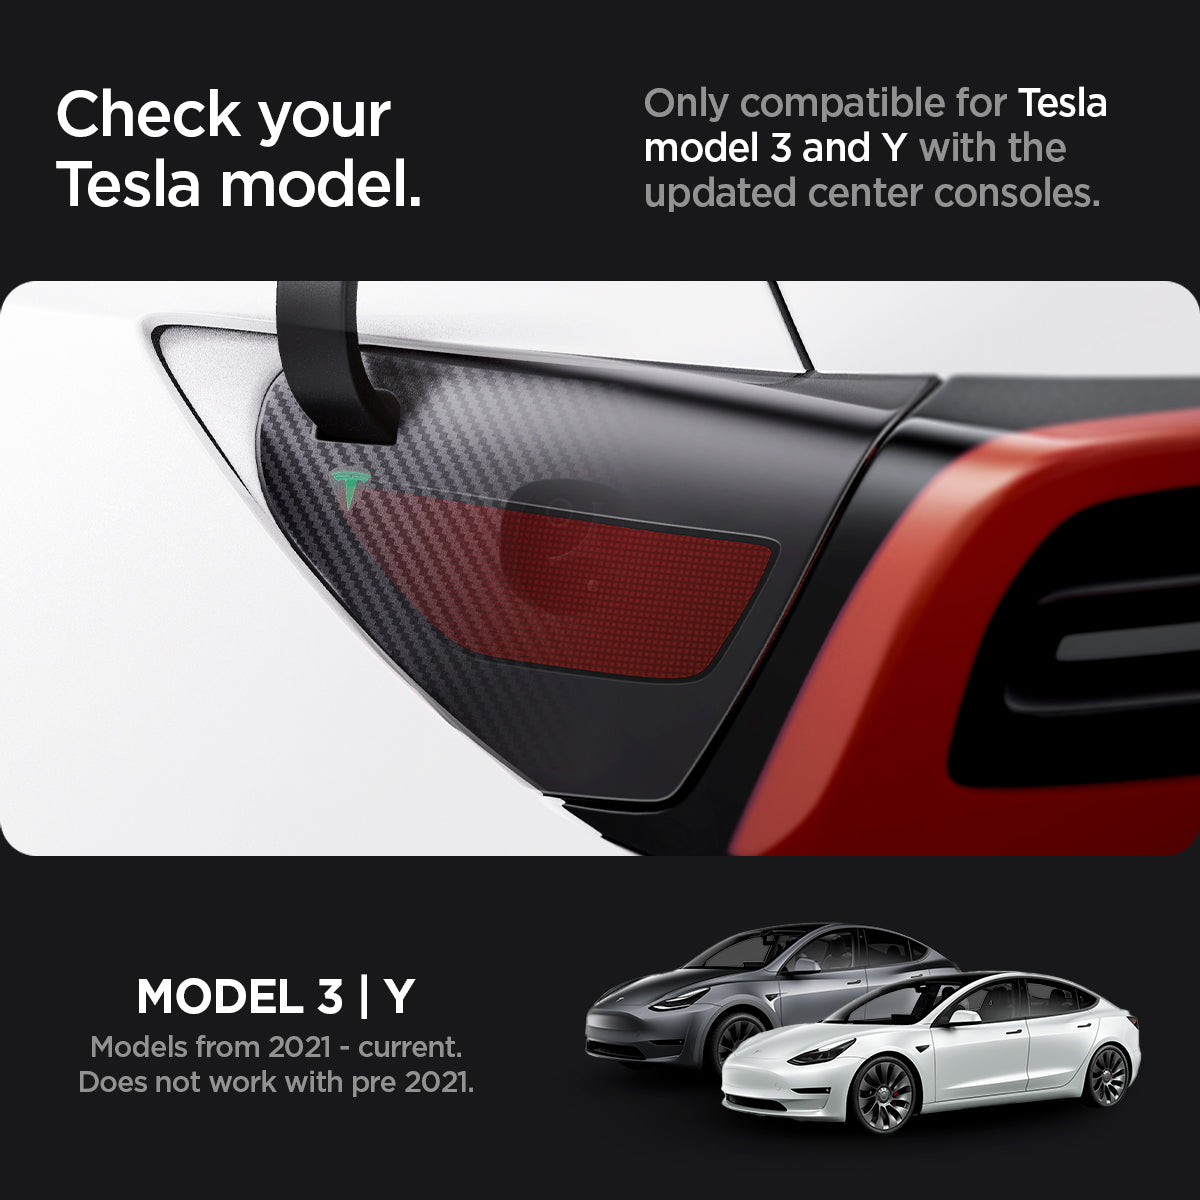 AFL07153 - Tesla Model Y & 3 Charging Port Protective Film in Transparency showing the checking of your tesla model, and only compatible for Tesla model 3 and Y with the updated center consoles. Model 3|Y (works with models from 2021-current but not on pre 2021)